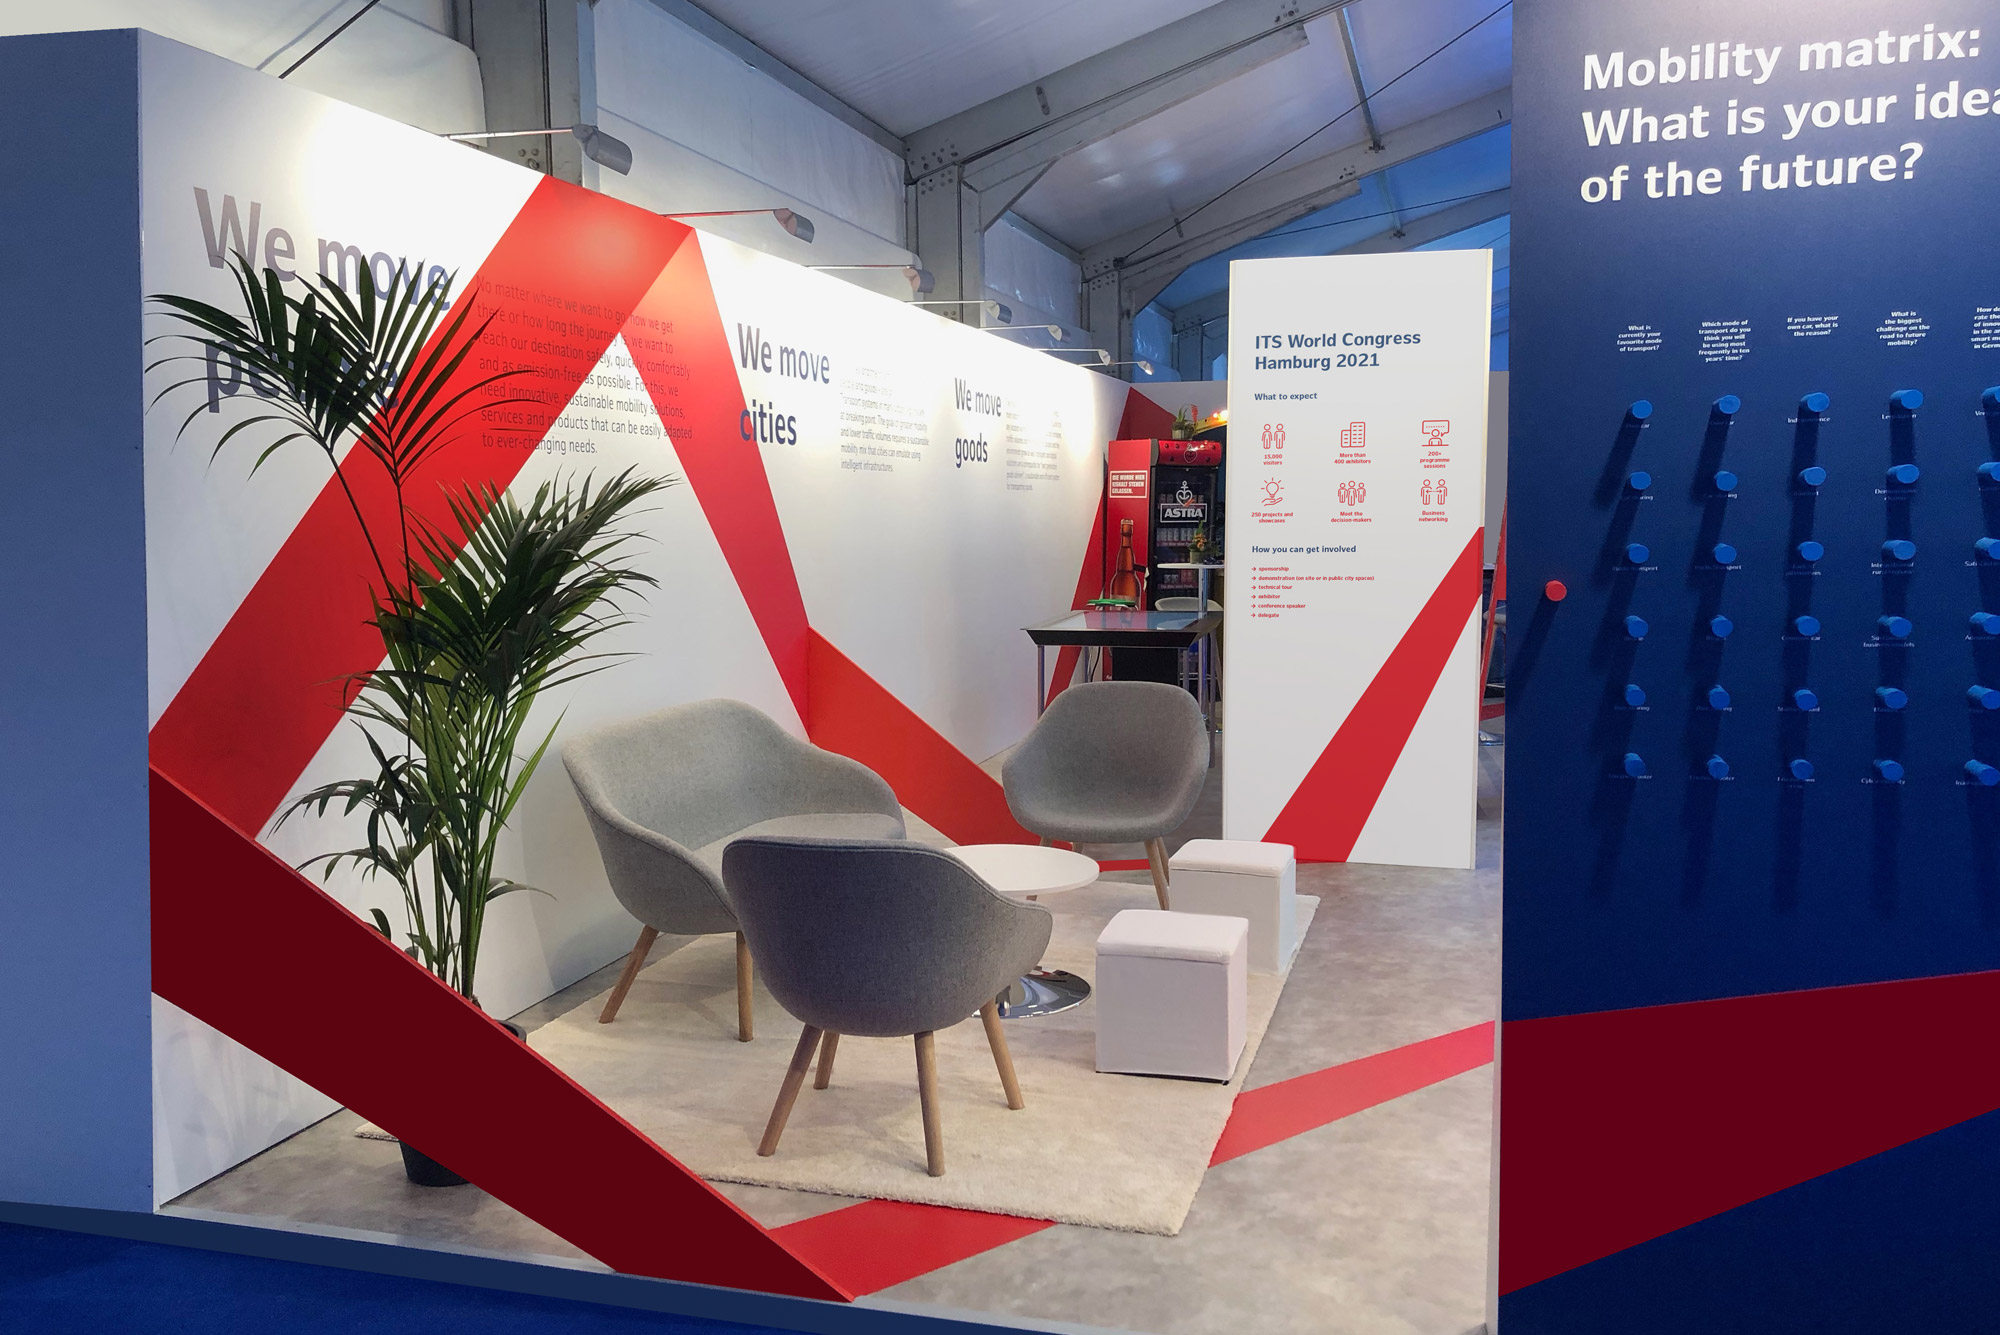 Photo of the ITS World Congress 2021 booth in blue and red with red ribbon as graphic element.